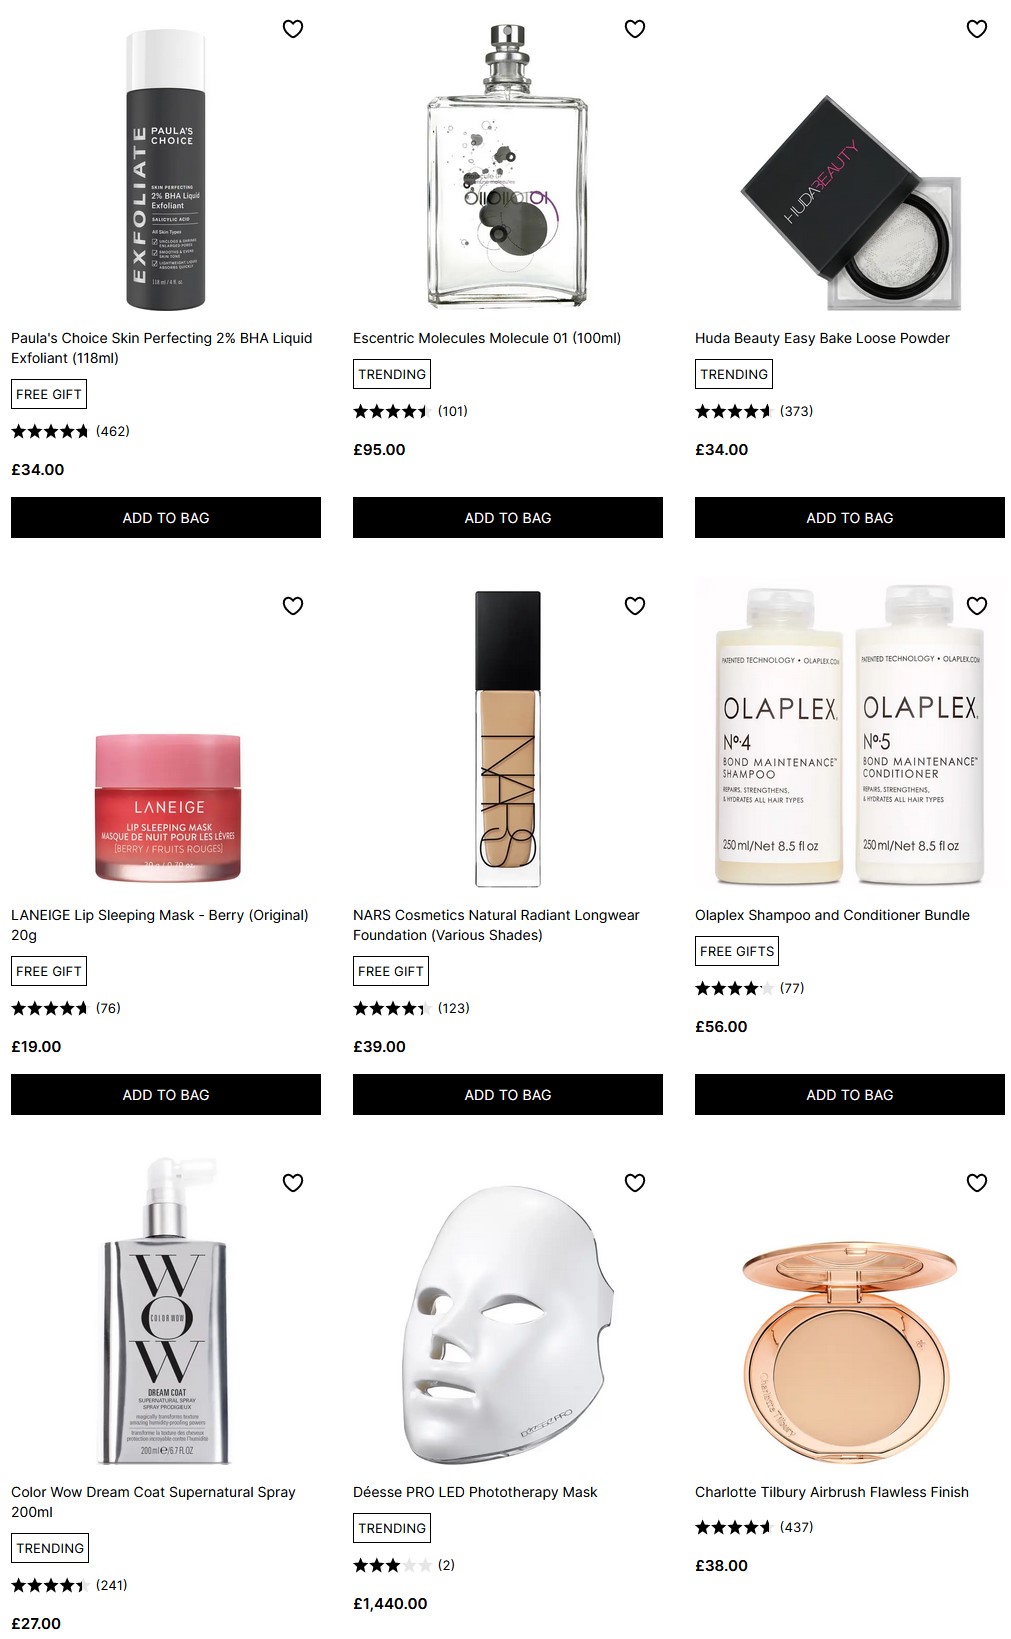 25% off when you spend $100 at Cult Beauty